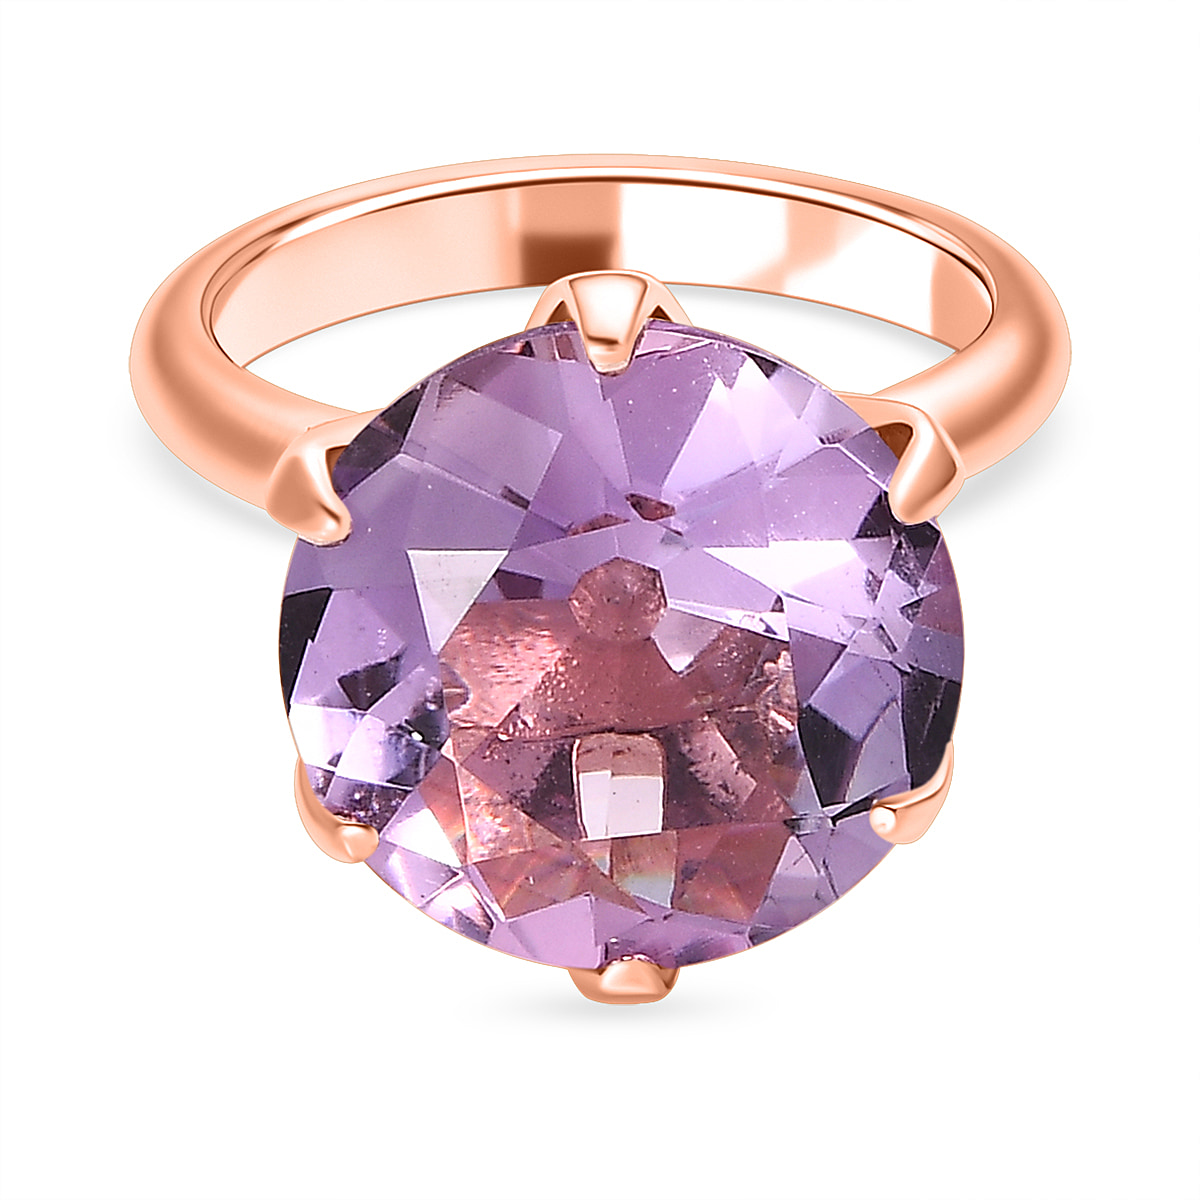 Ultimate Rose De France Amethyst (European Cut) Solitaire Ring in 18K Rose Gold Vermeil Plated Sterling Silver 11.00 Ct